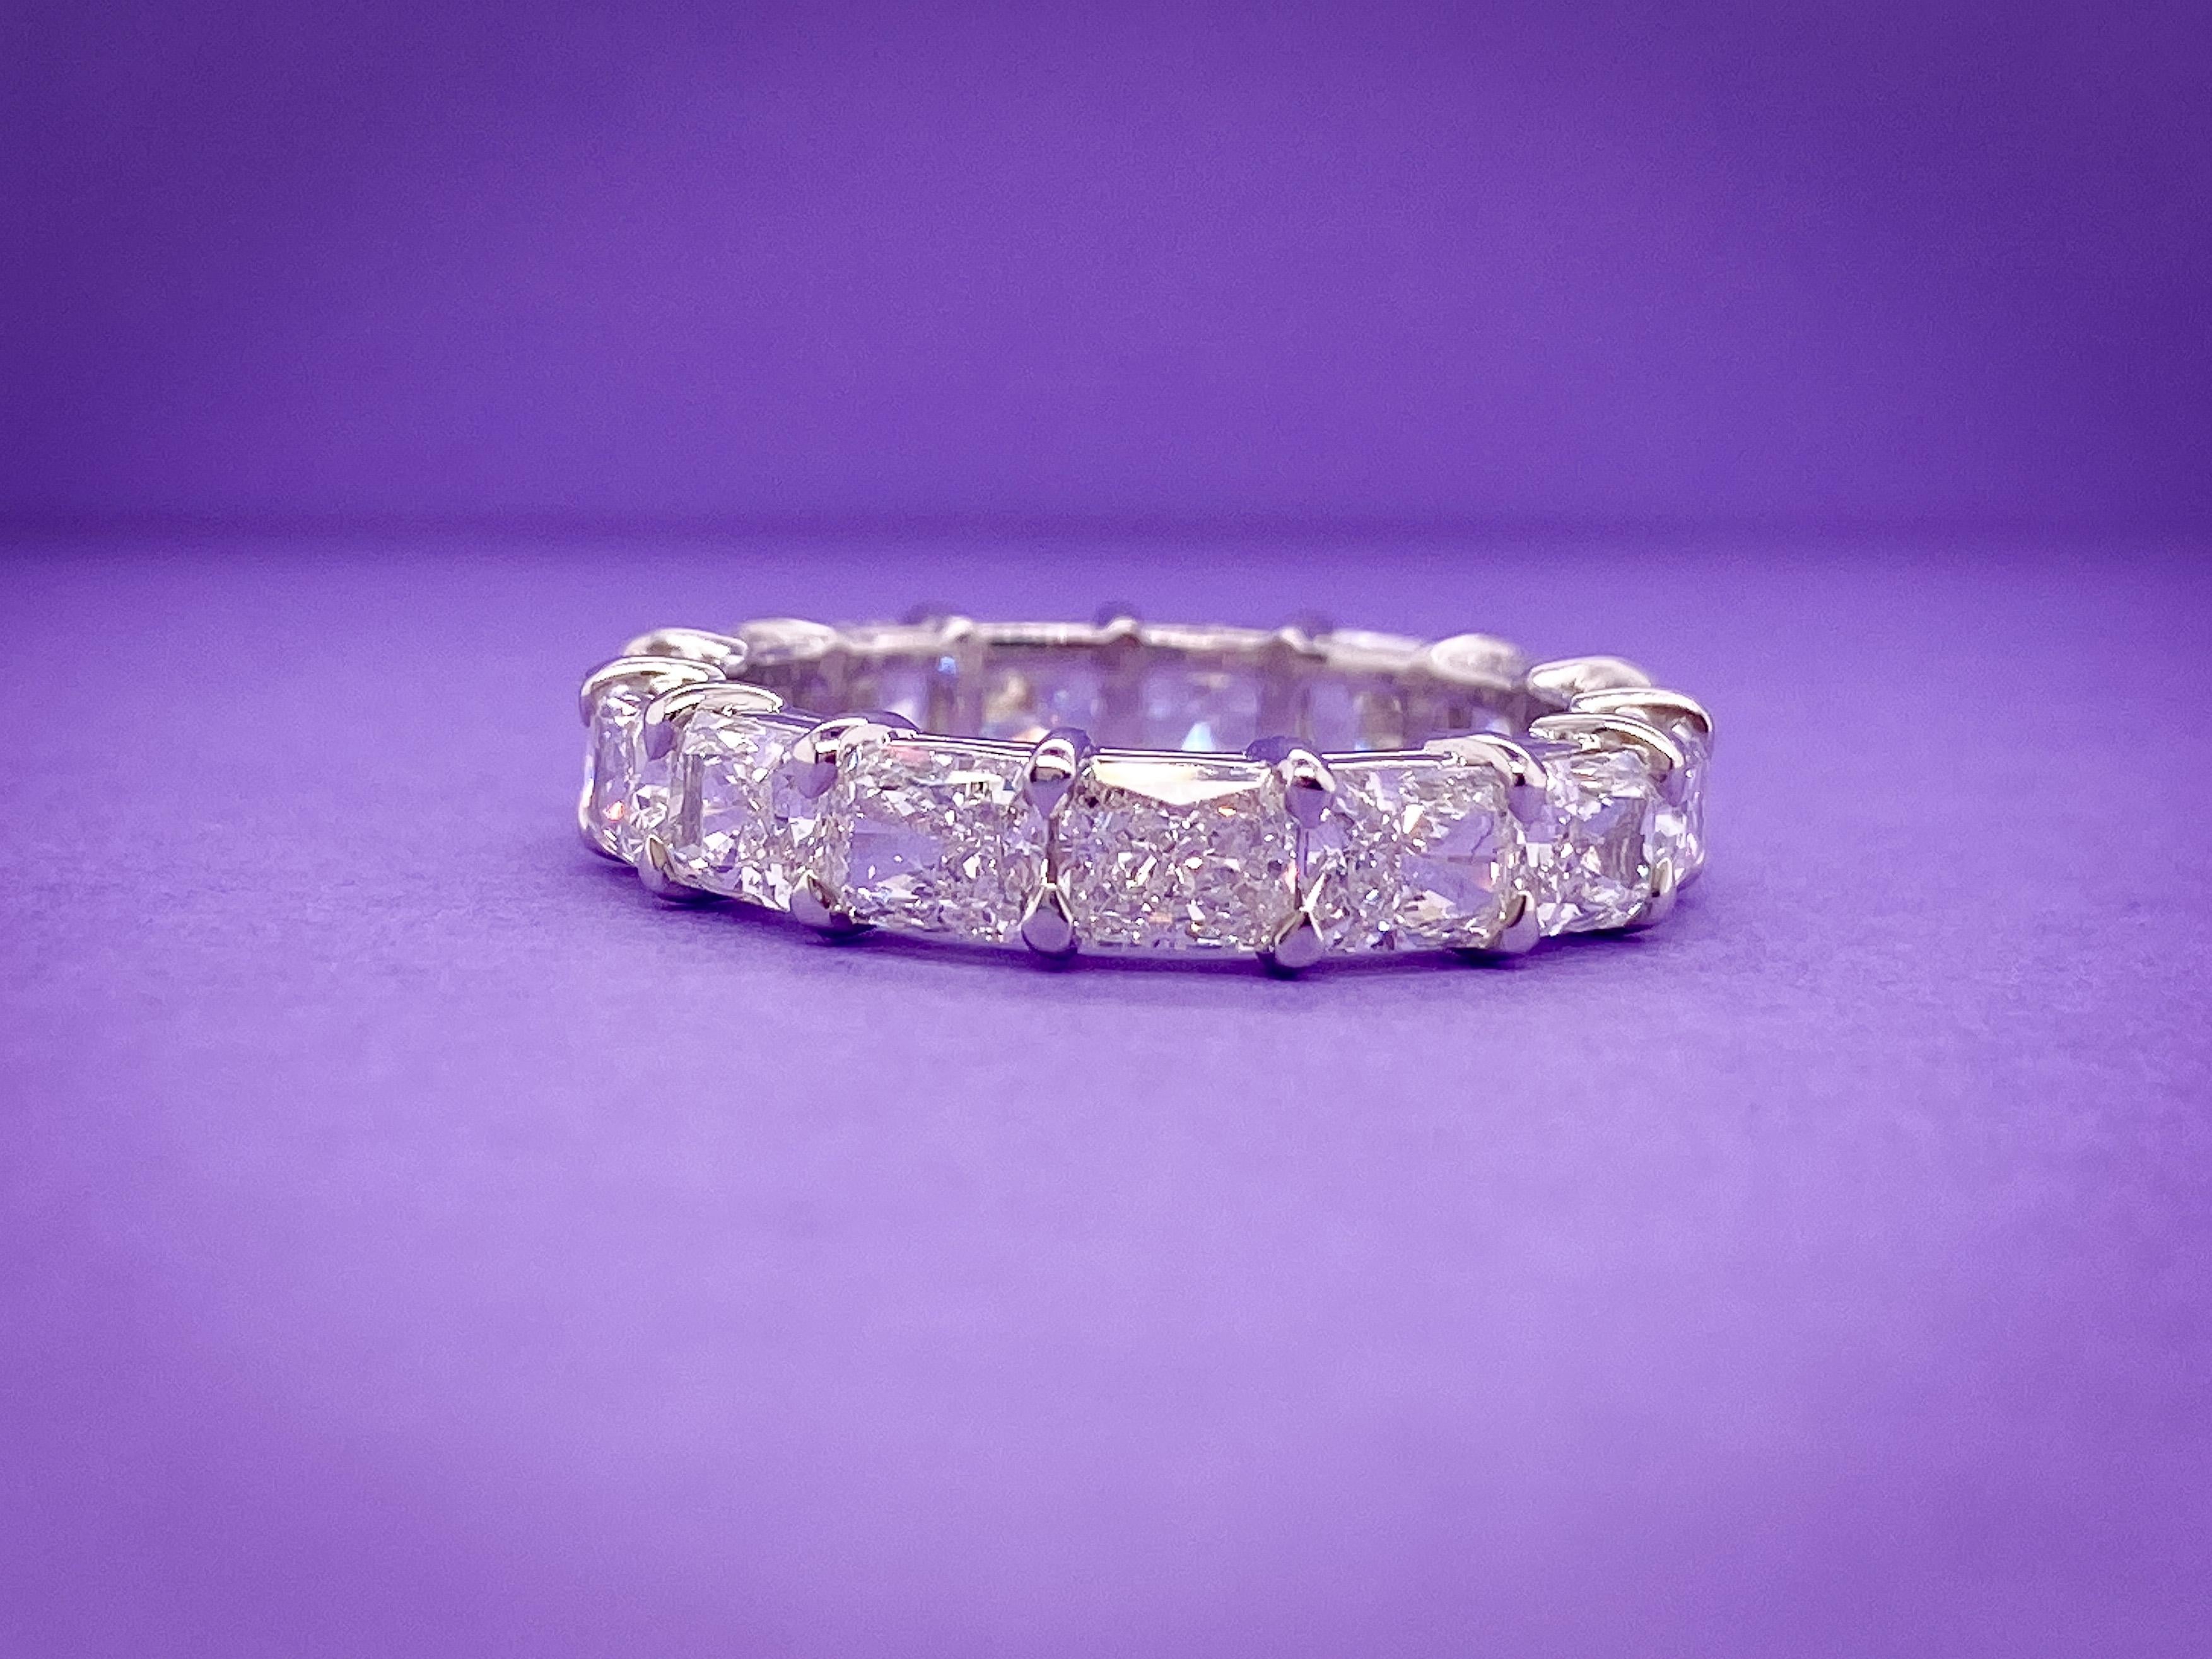 It's a sparkle with a twist! This Radiant Horizontal Eternity Band features 15 Radiant Diamonds, with a total weight of 4.59 Carats. The stones are G-H Color and VS Clarity and are set Horizontal for a fun and unique twist. The ring is set in